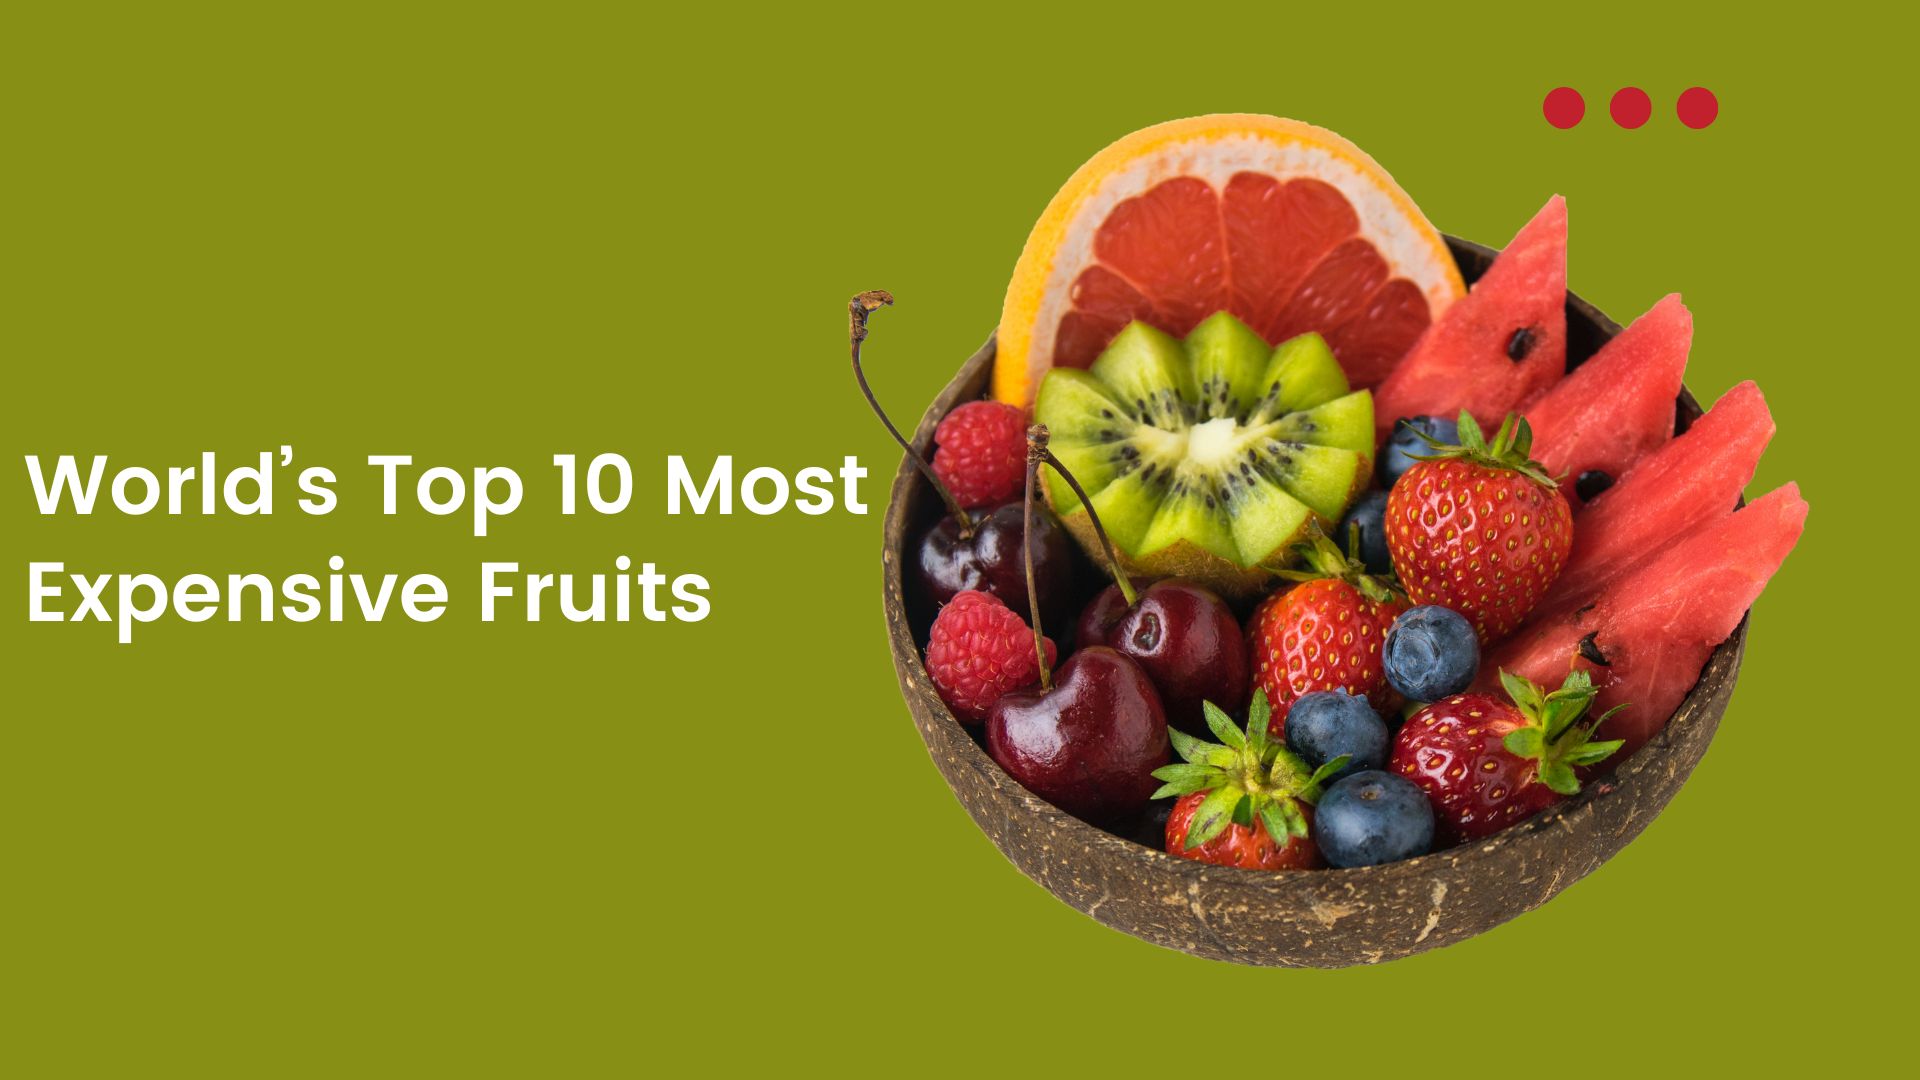 Taste the Opulence: The Top 10 Most Expensive Fruits in the World